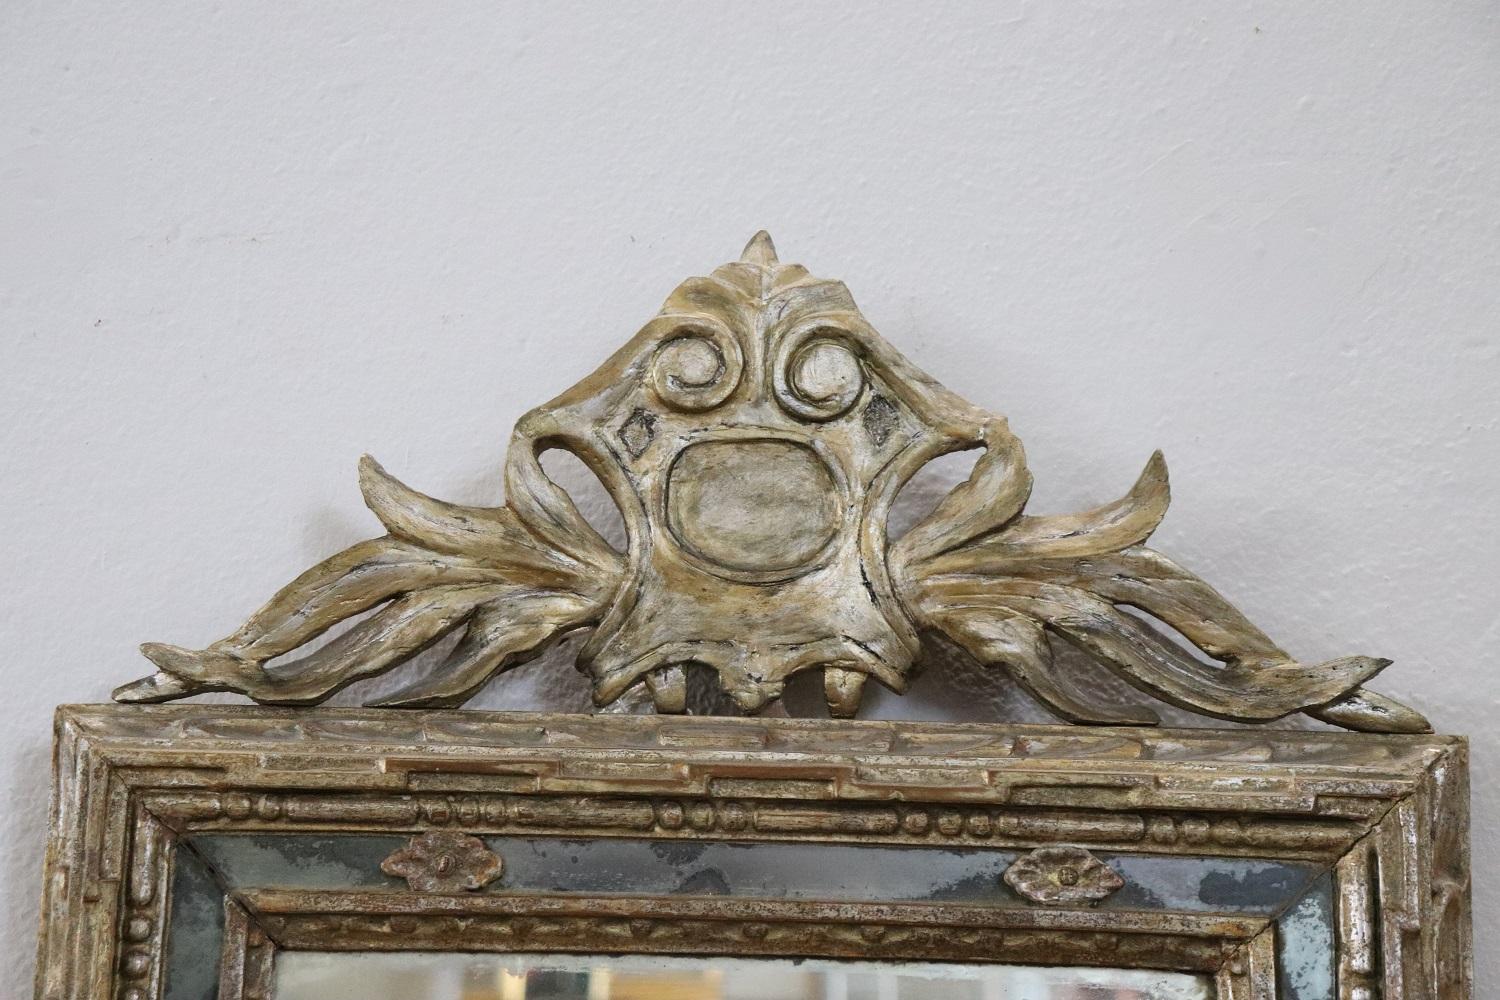 Beautiful elegant antique Louis XVI wall mirror 1780s. Hand carved wood with finely and richly swirls and curls. Refinement decorated in mecca gilding. In good antique conditions. The mecca gilding has a beautiful antique patina. The mirror is